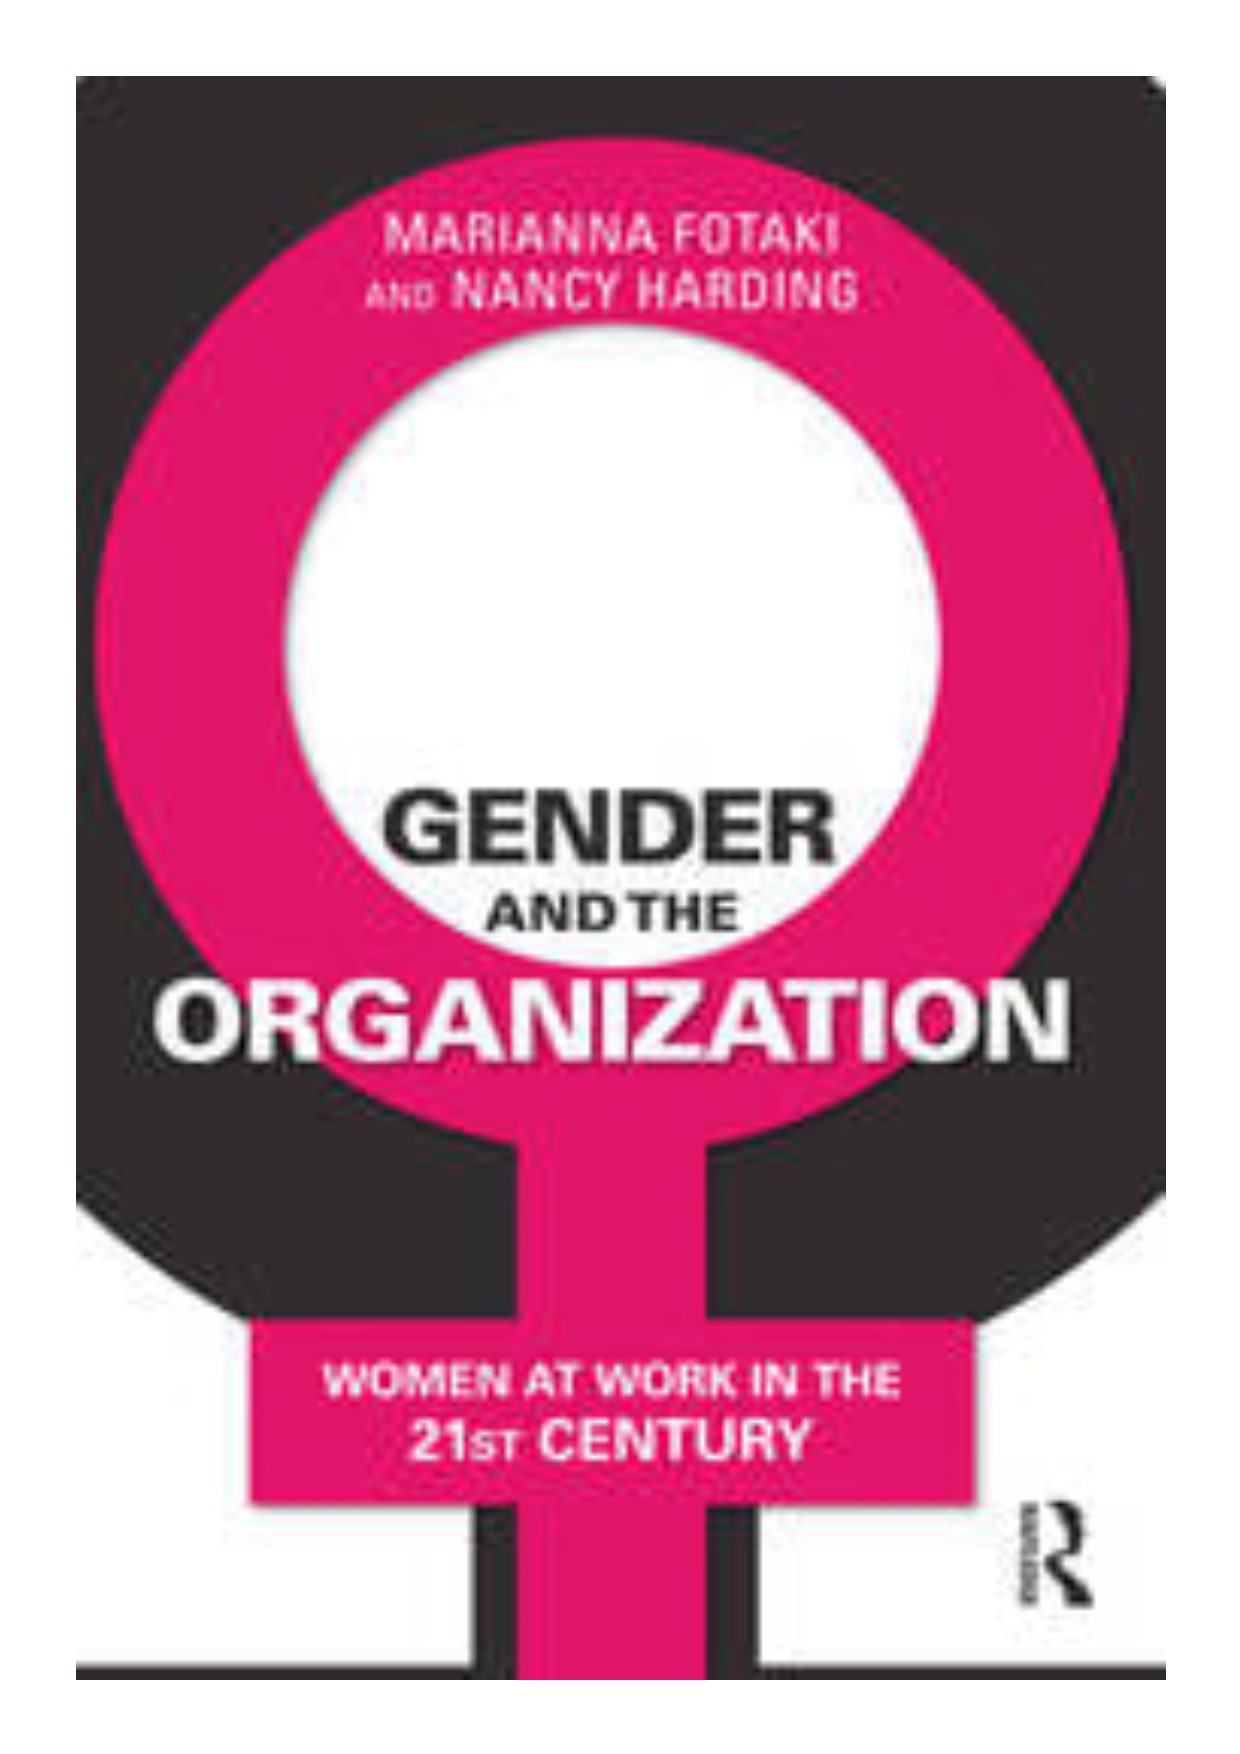 Gender and the organization women at work in the 21st century